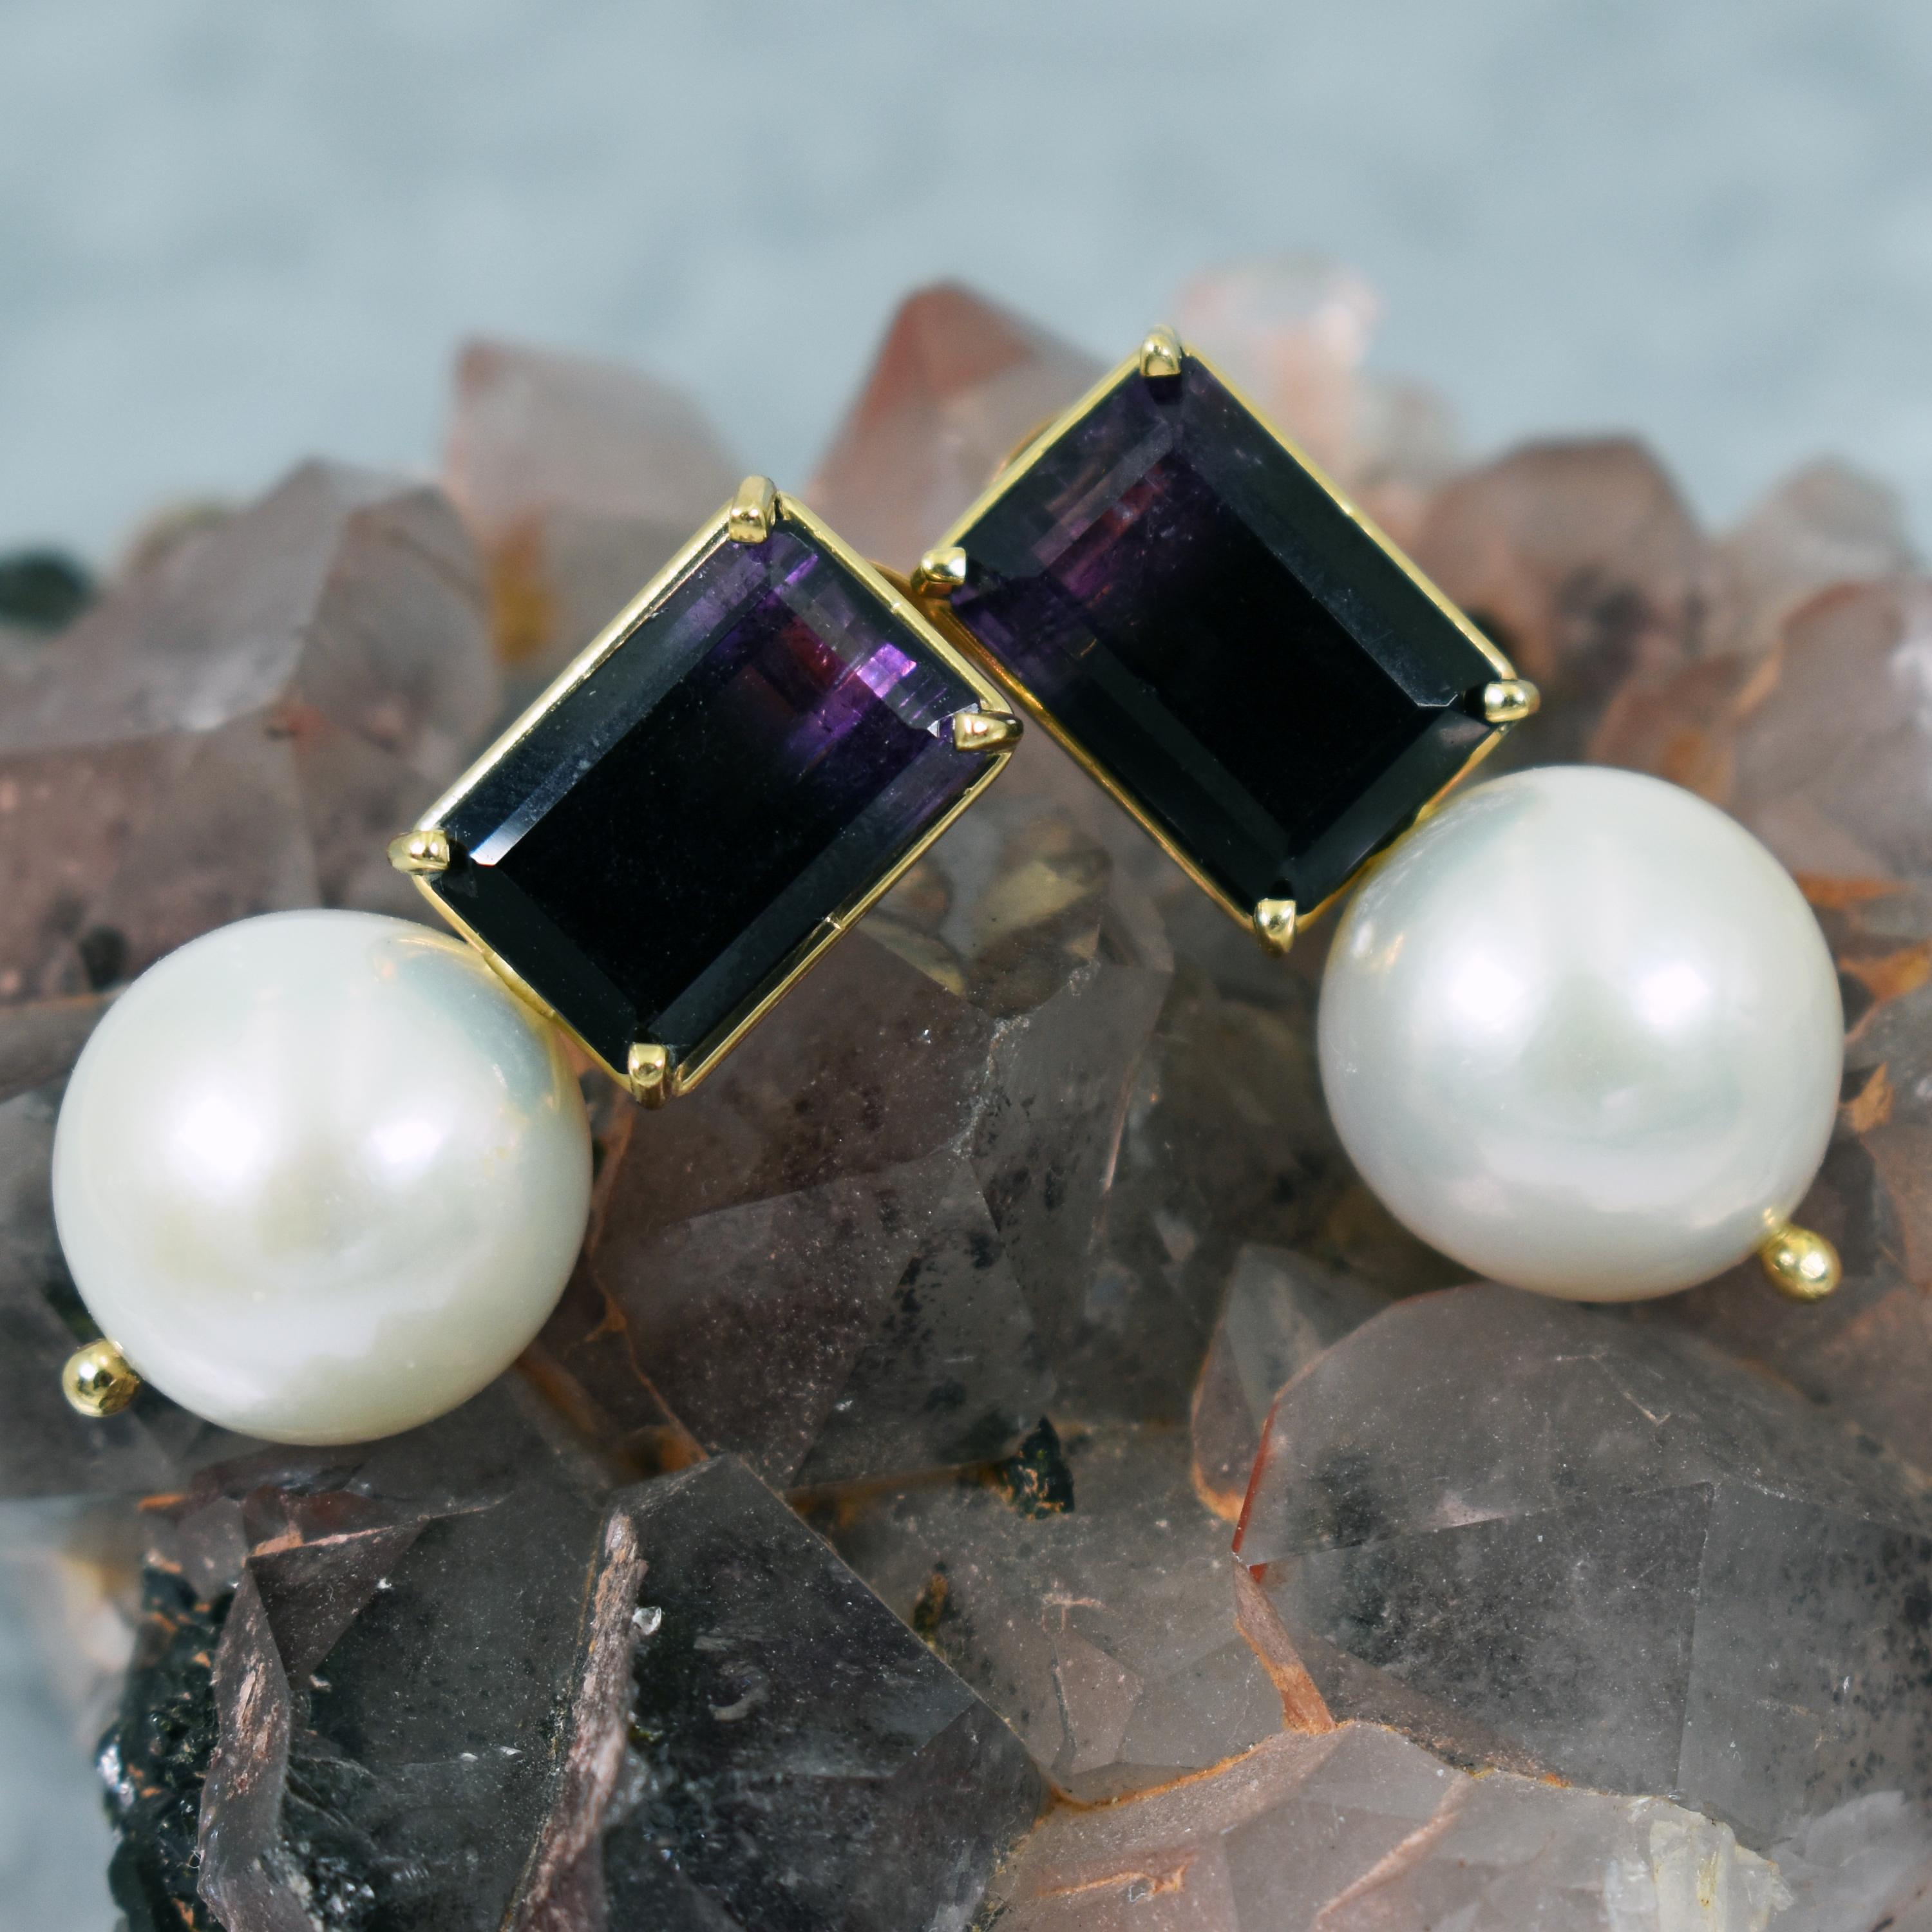 10.97 carat emerald-cut Blue John Fluorite and round, white 14mm Freshwater Pearl drop 14k yellow gold stud earrings. Stud earrings are 1.25 inches or 32mm in length. Gorgeous, deep purple gradient ombré Blue John Fluorite and Pearl gemstones make